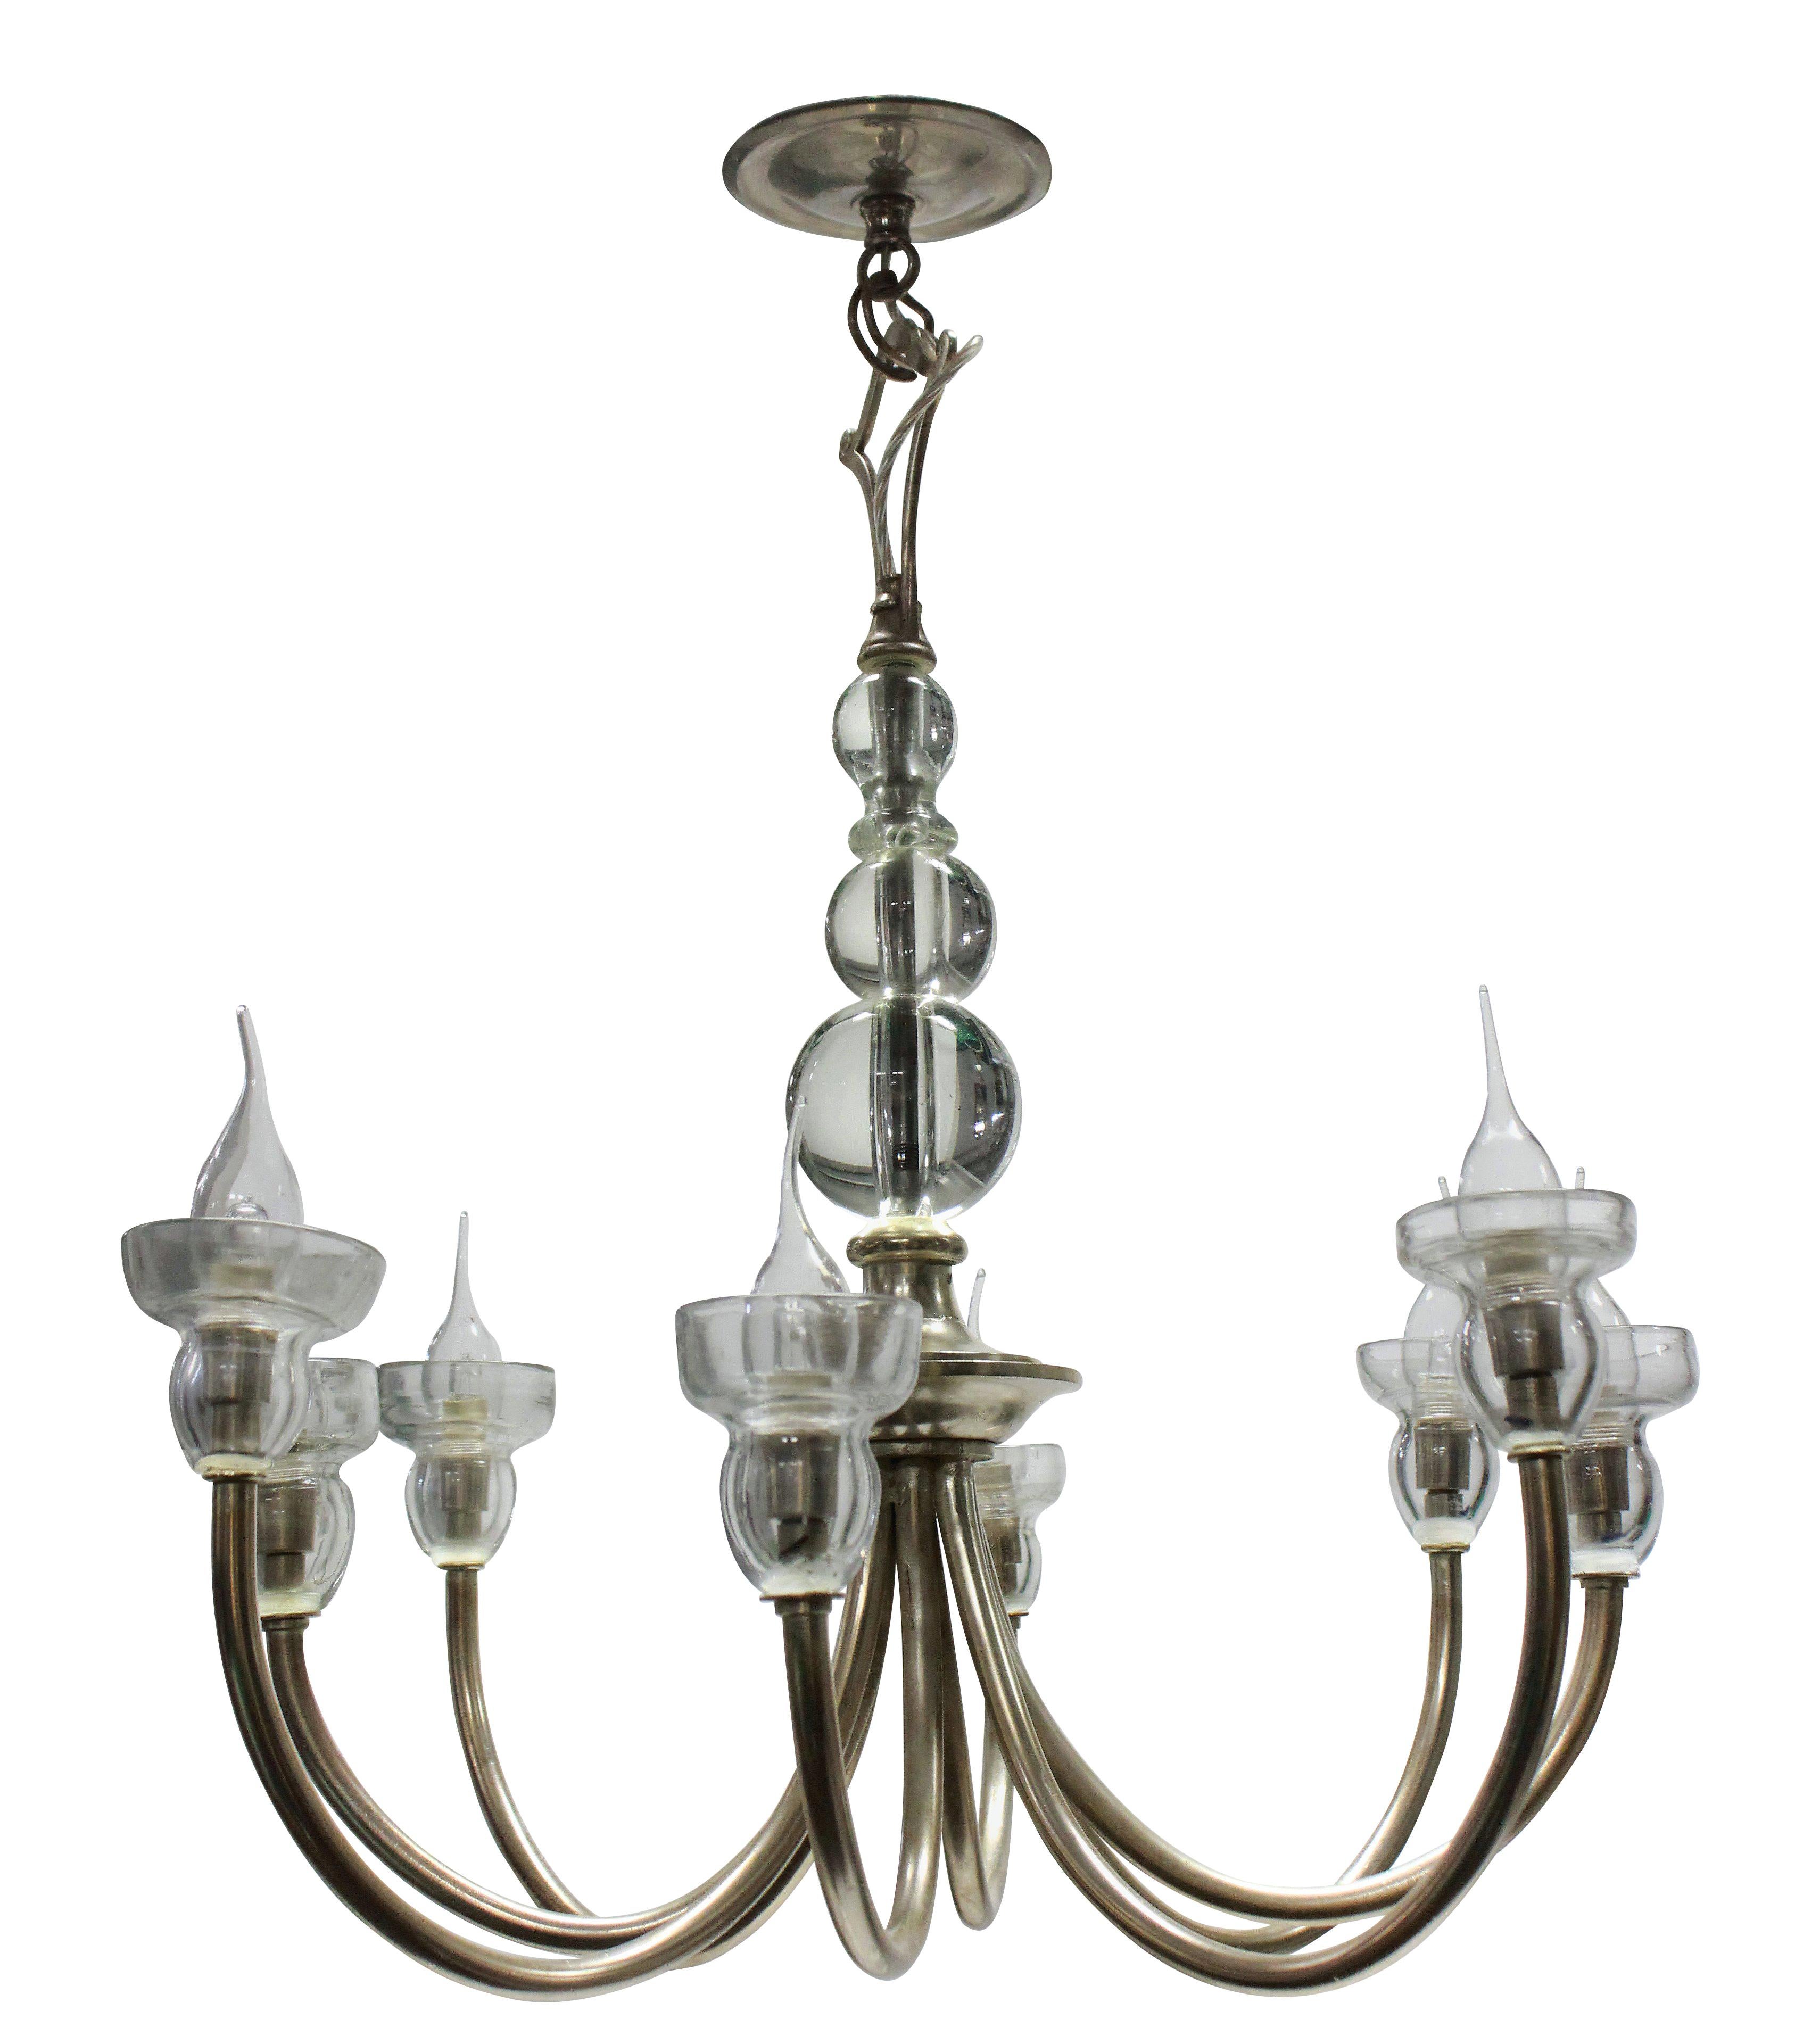 A French chandelier of interesting design in silvered metal with good quality glass detailing with a spherical centre stem and drip sconces.